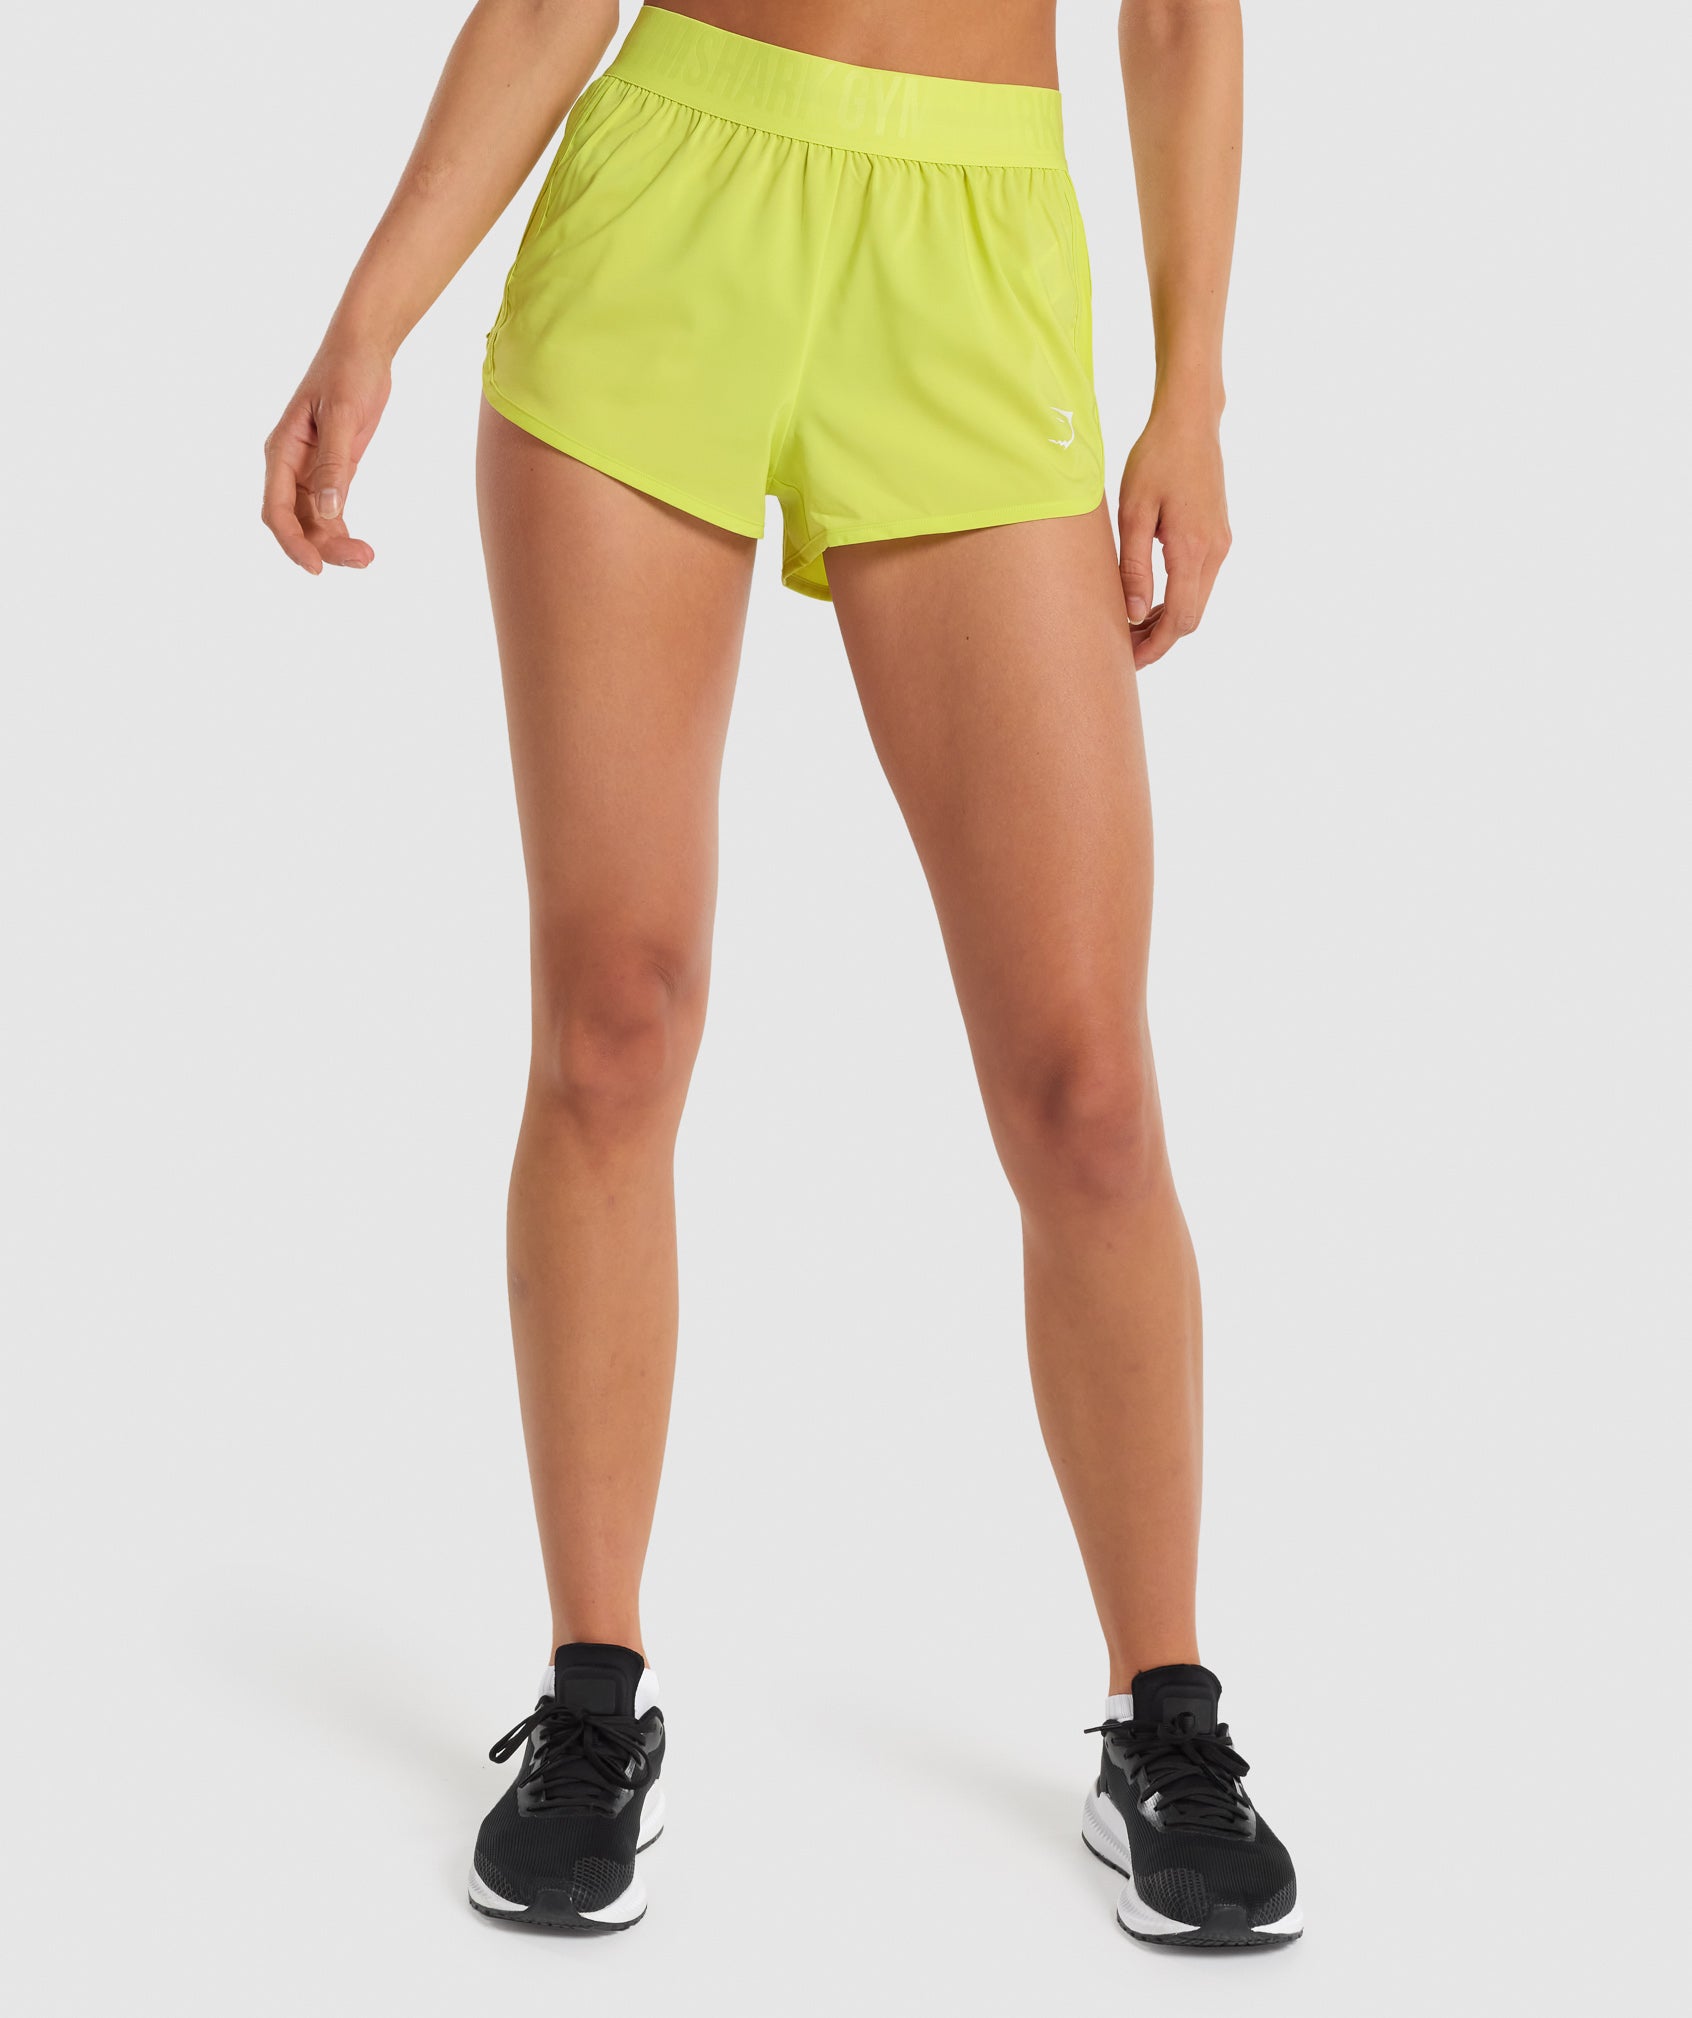 http://cdn.shopify.com/s/files/1/0156/6146/products/TRAININGLOOSEFITSHORTS-GLITCHYELLOW_20.A_ZH_ZH.jpg?v=1653925161